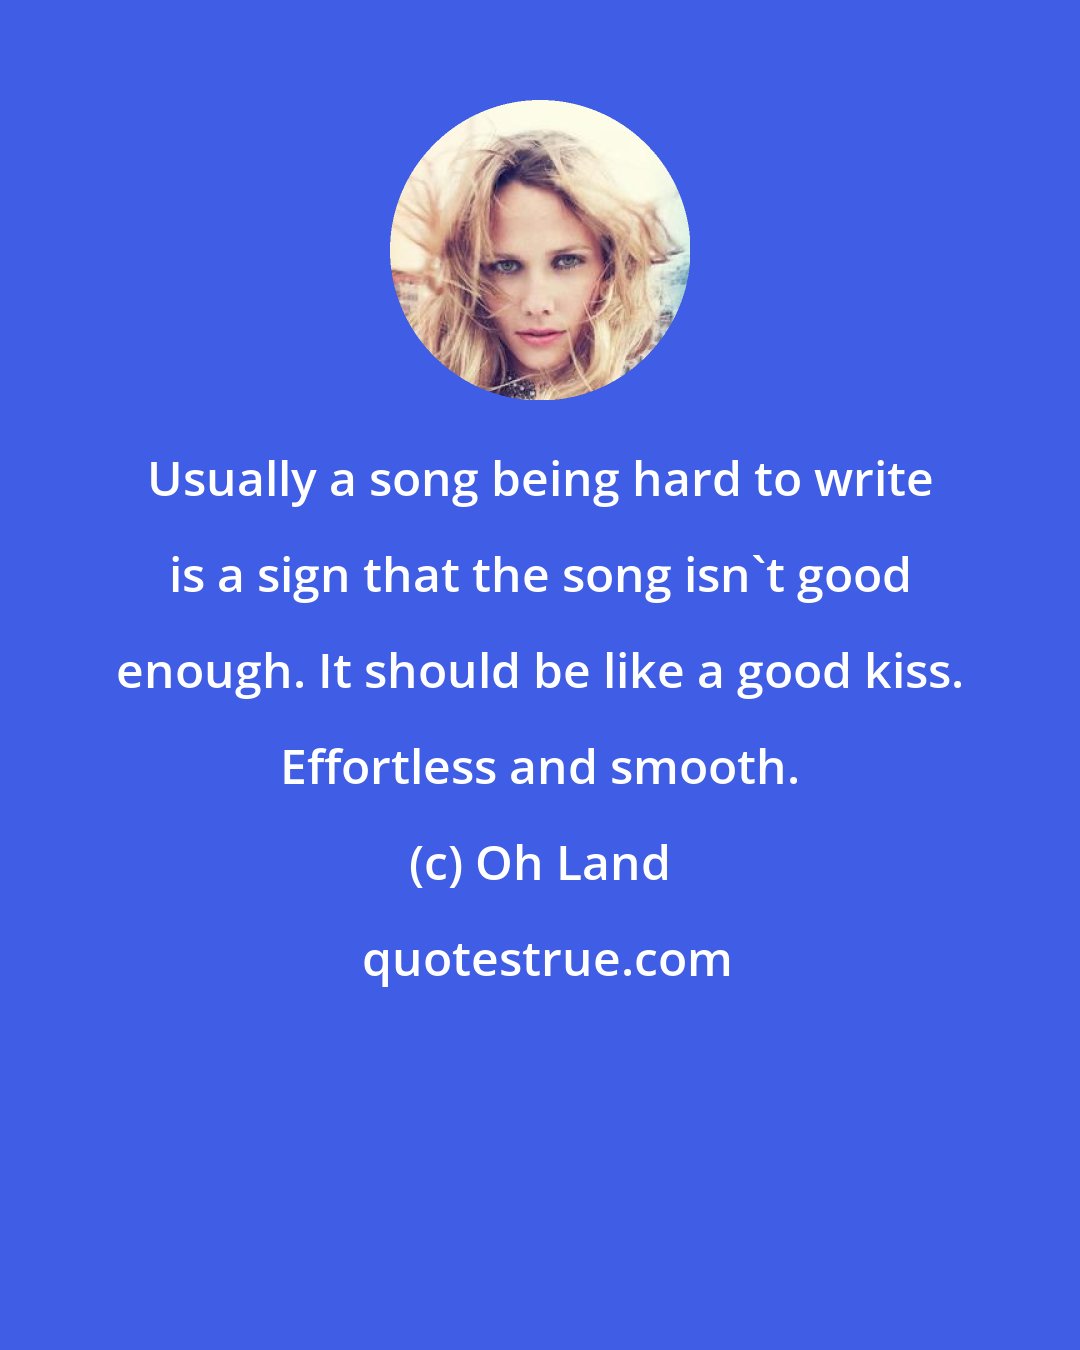 Oh Land: Usually a song being hard to write is a sign that the song isn't good enough. It should be like a good kiss. Effortless and smooth.